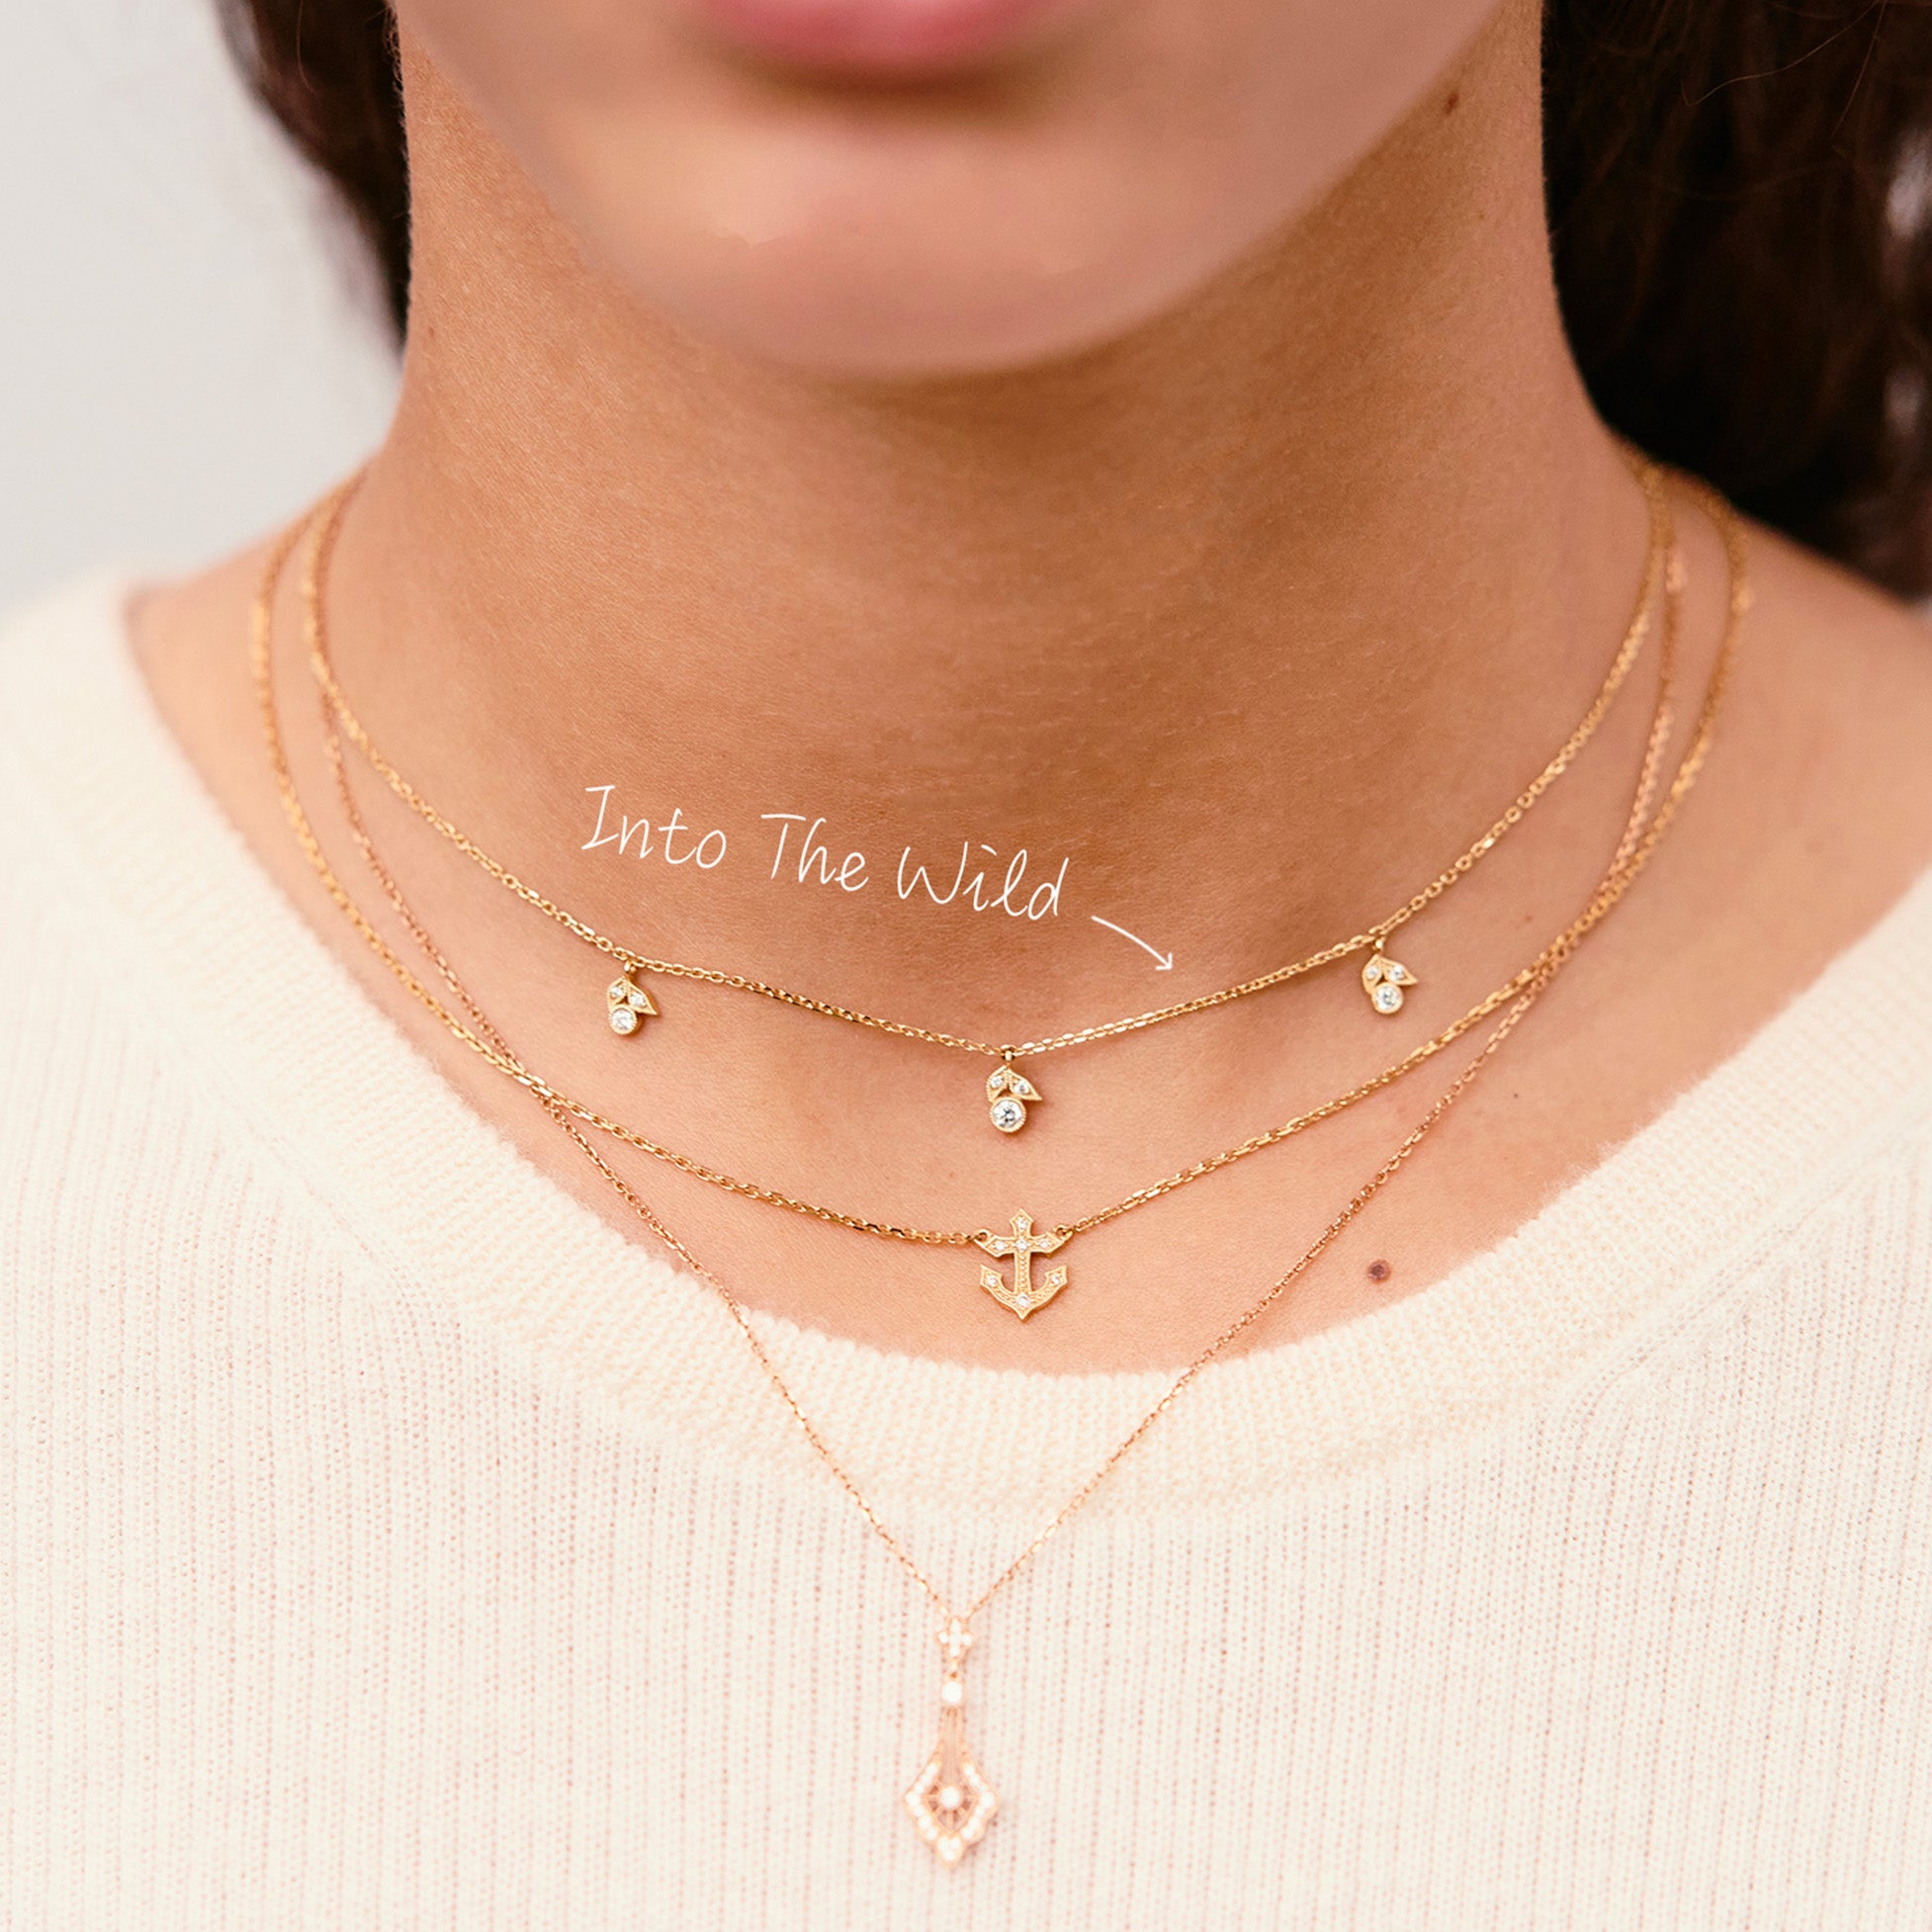 Necklace - Into the wild